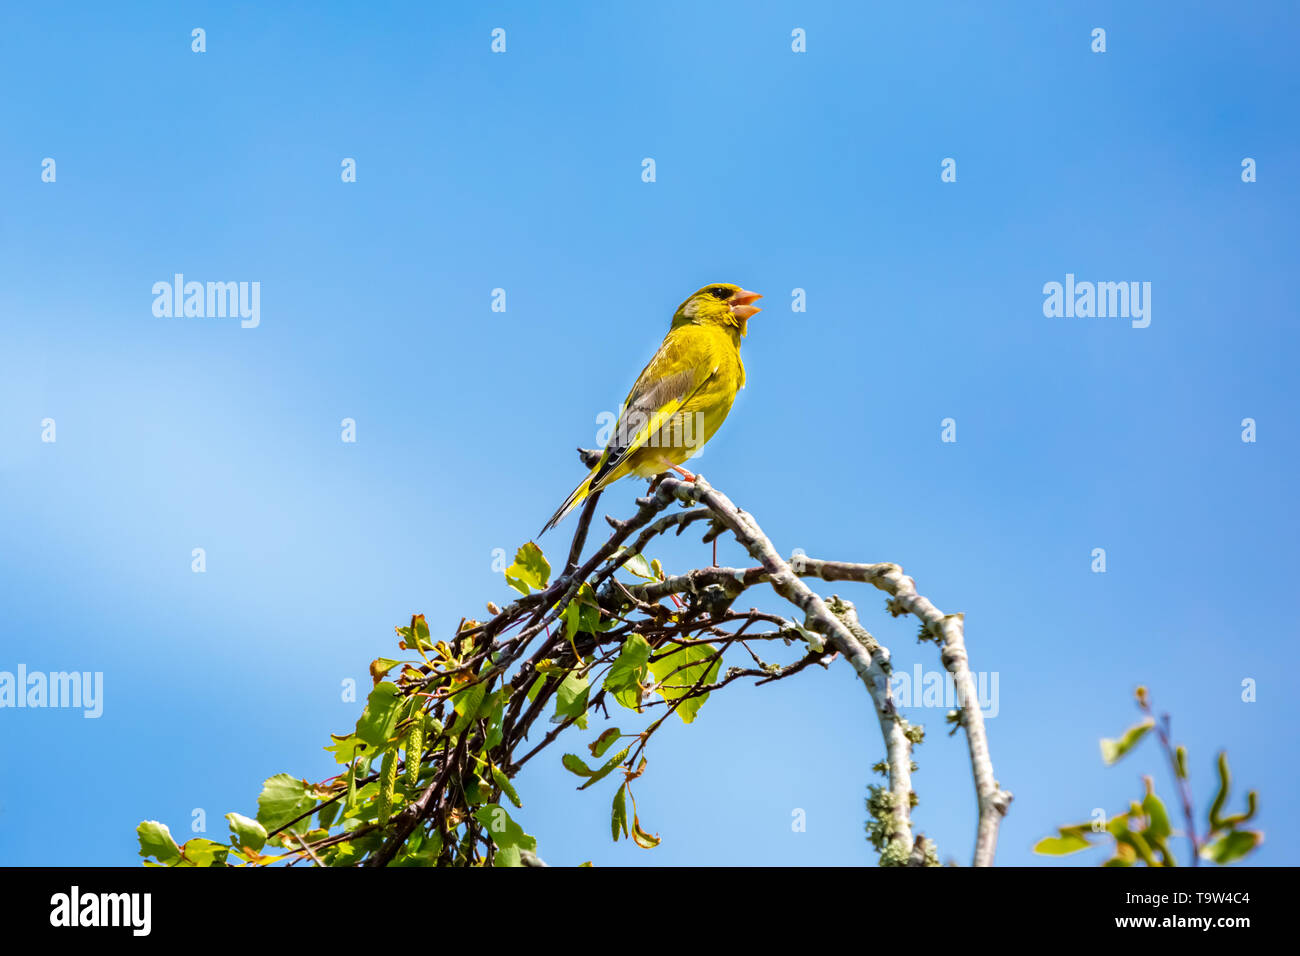 Isolated Greenfinch (Carduelis chloris) adult male bird in spring perched up high on blue background. Stock Photo